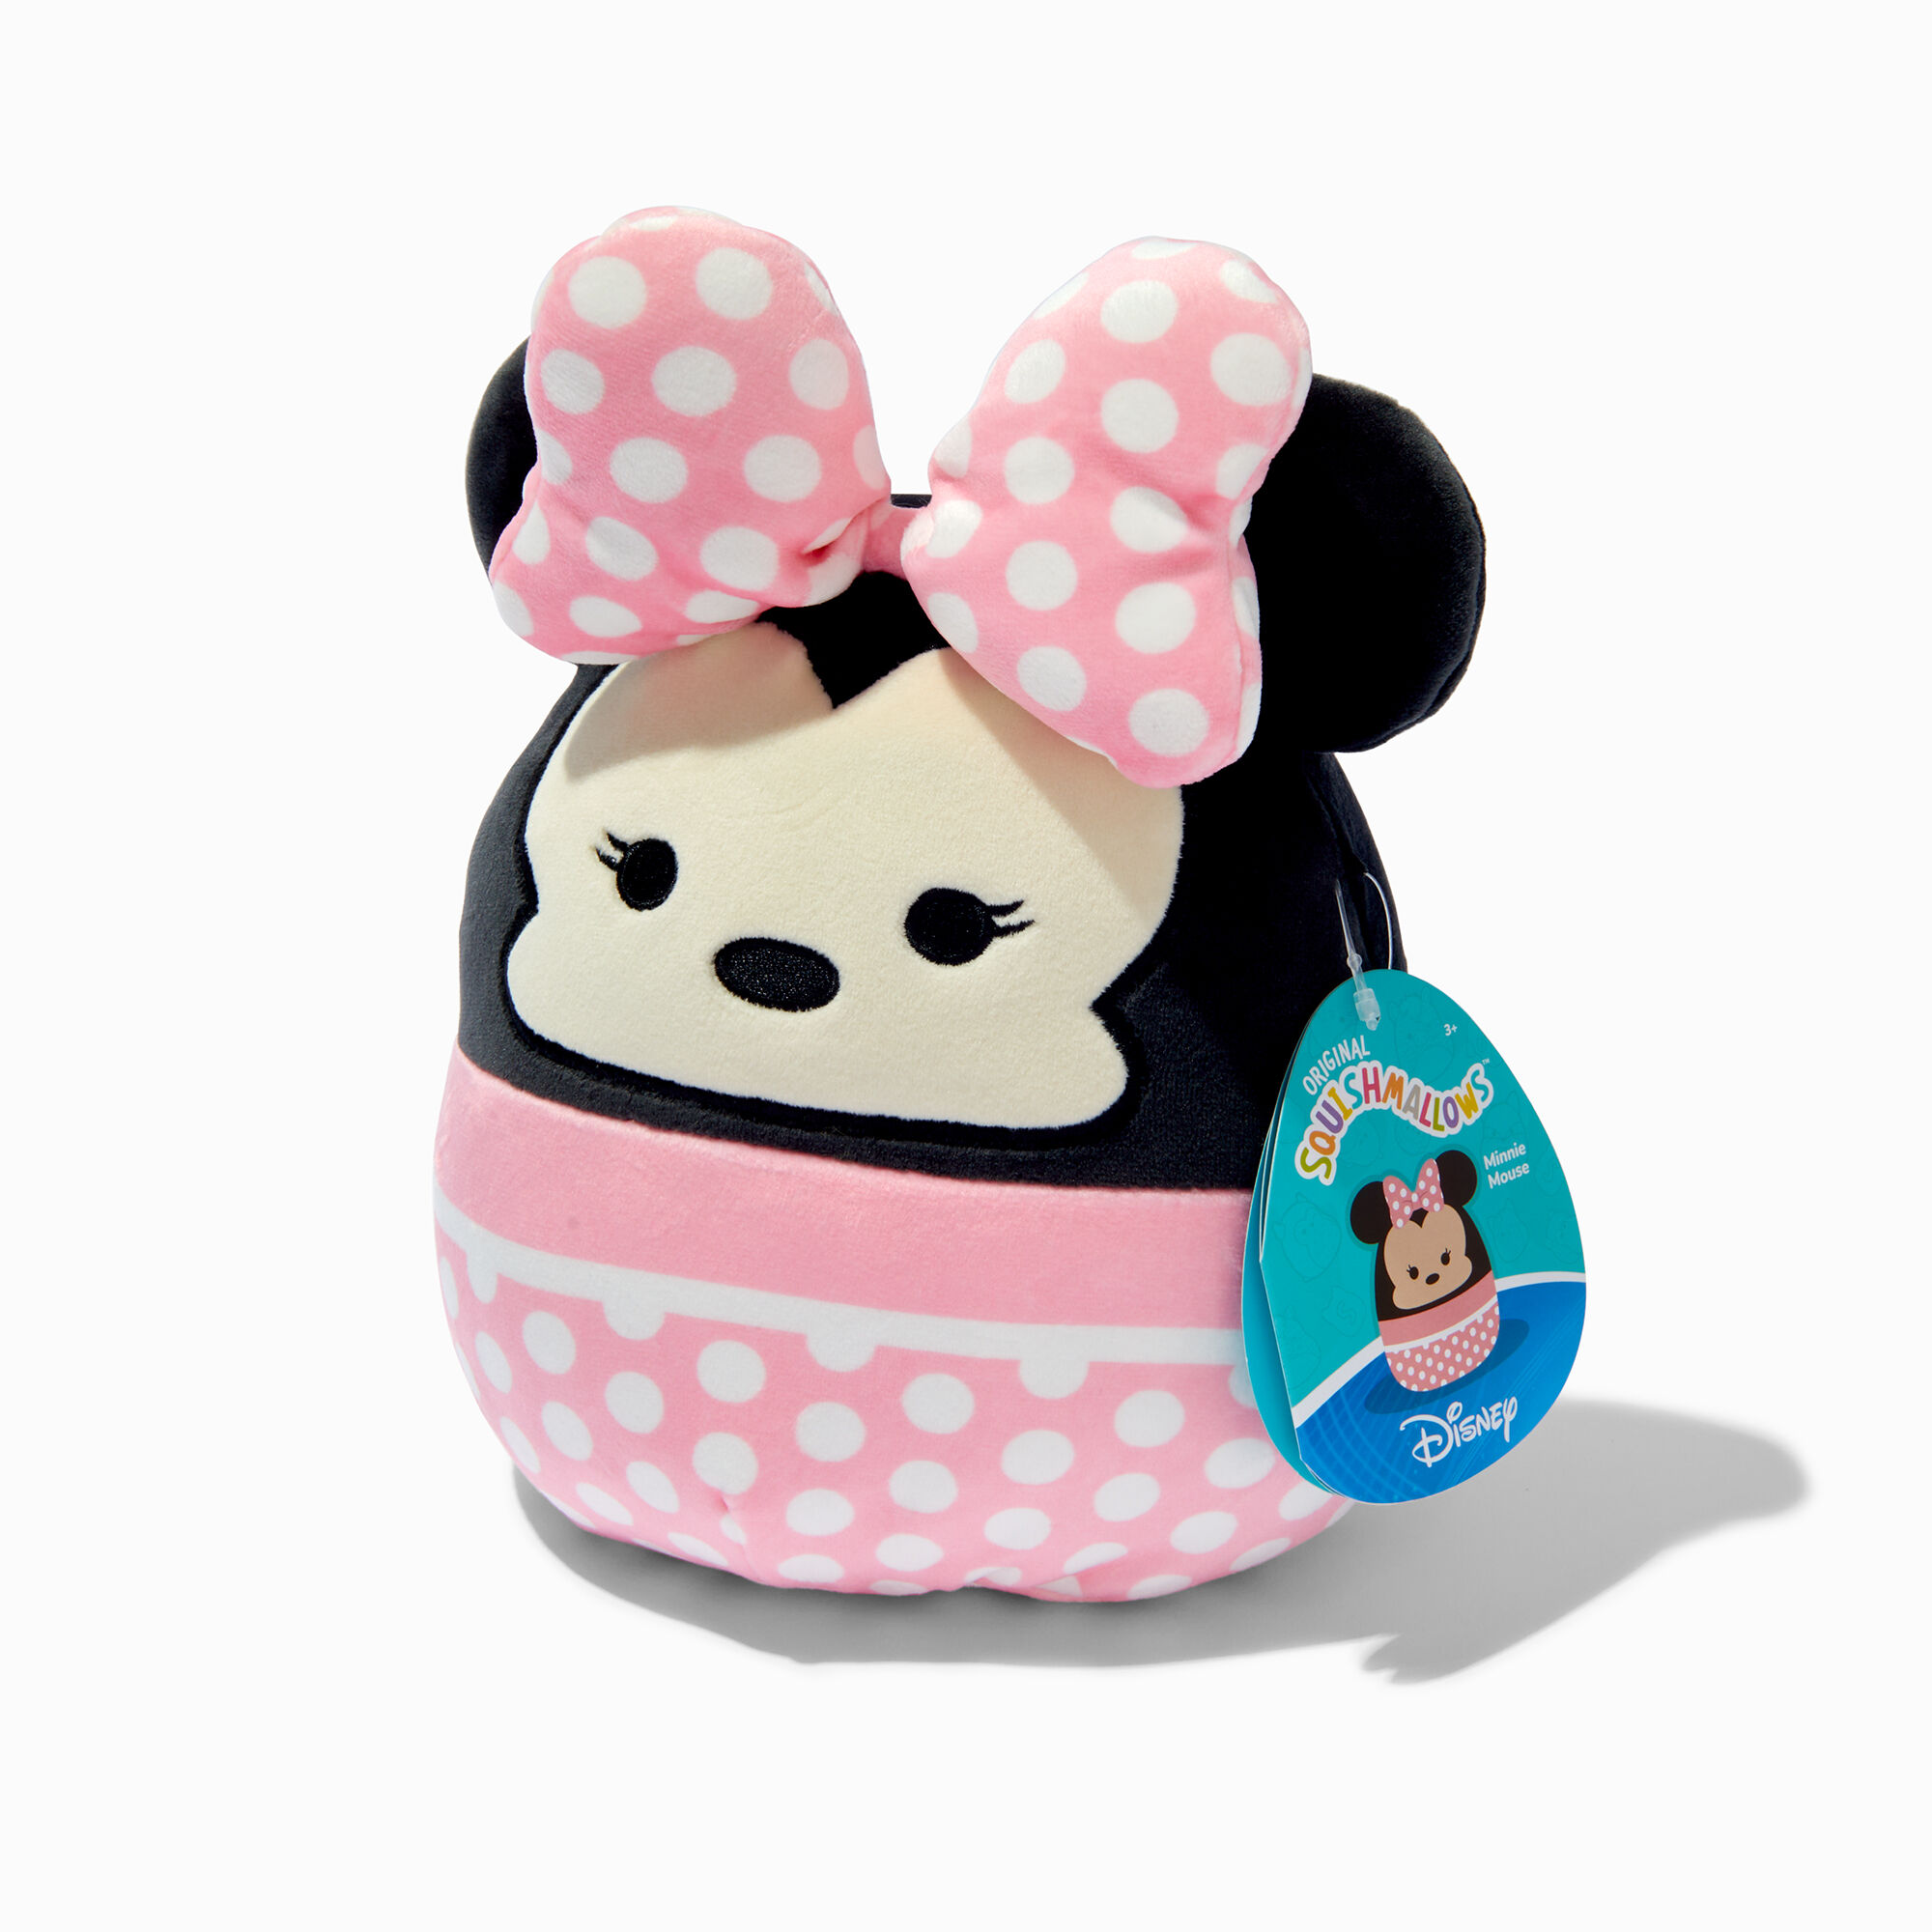 View Claires Disney Squishmallows 7 Soft Toy Styles May Vary information